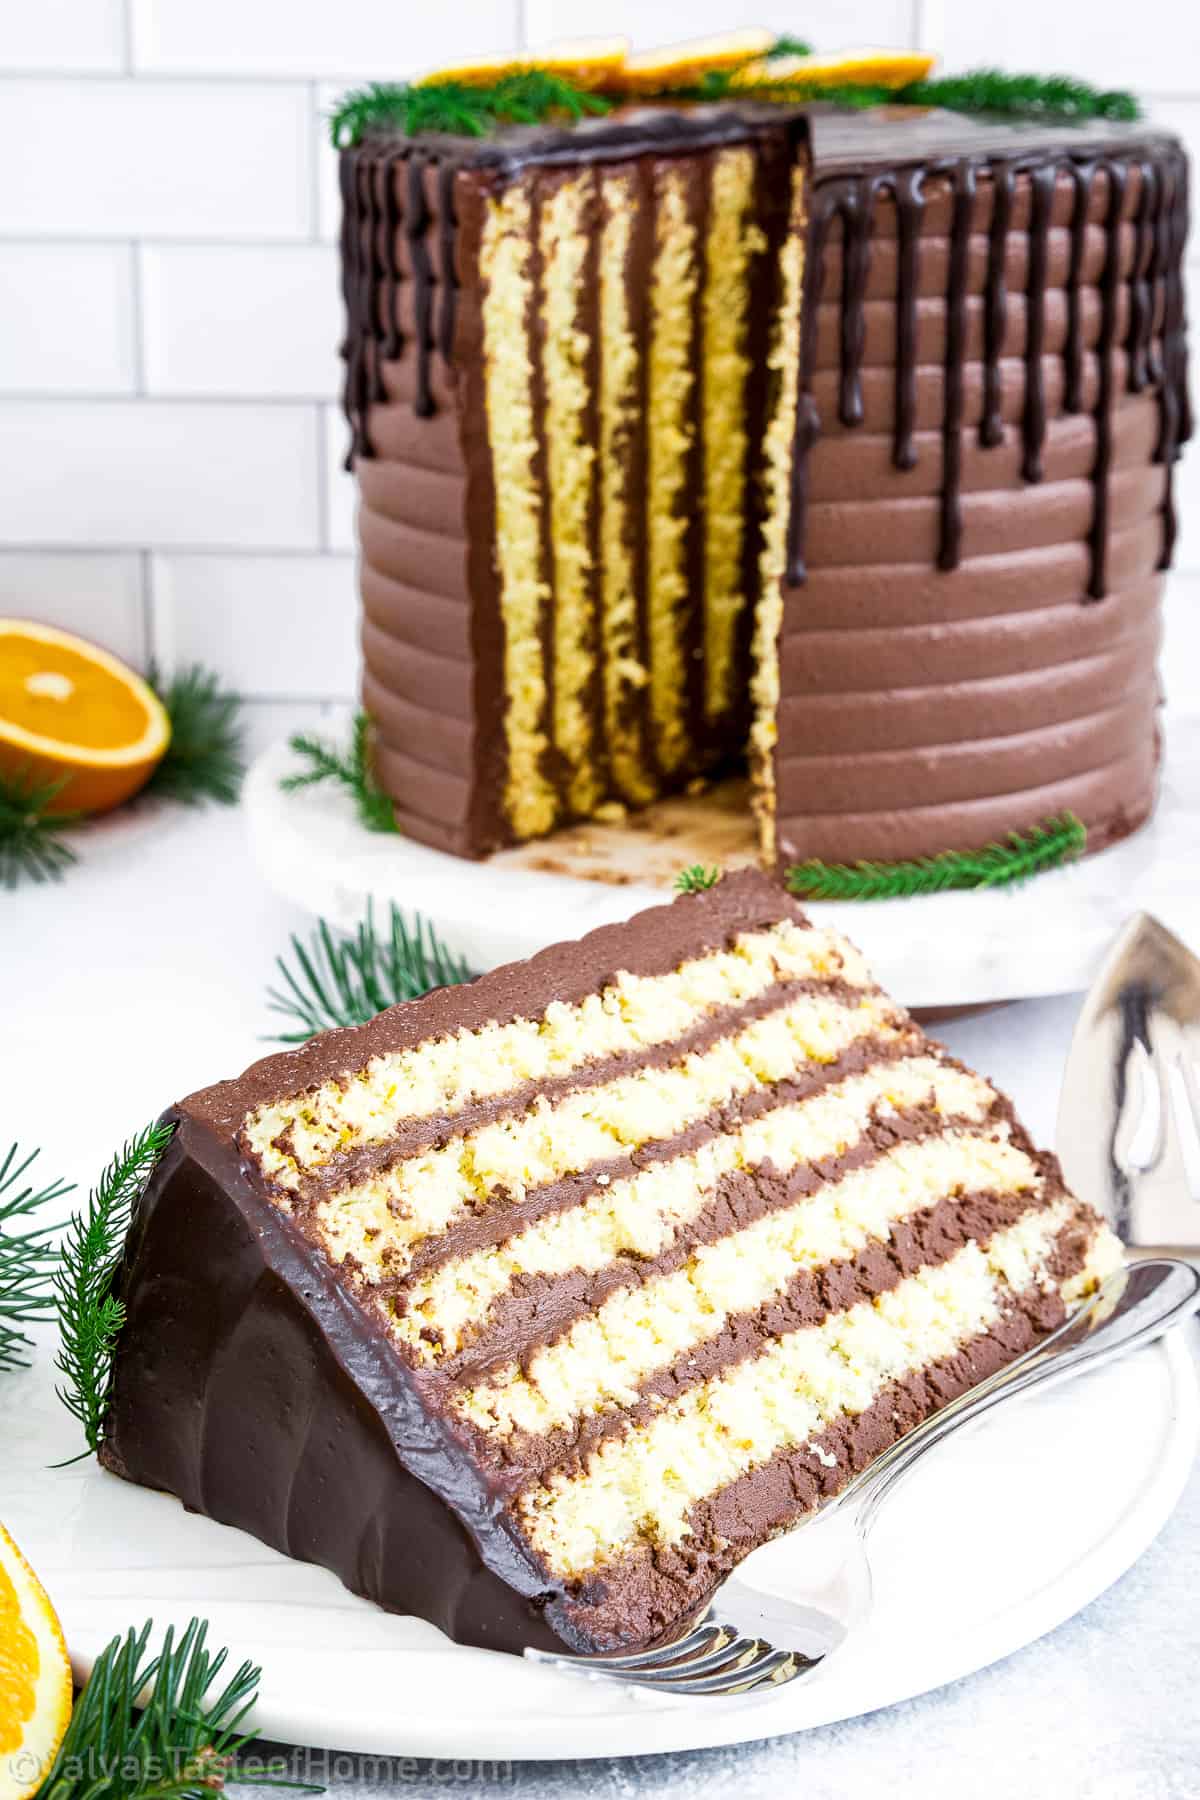 The moist, fluffy cake pairs perfectly with the creamy, rich frosting, and the orange zest adds a bright, fresh note that cuts through the richness of the chocolate. 